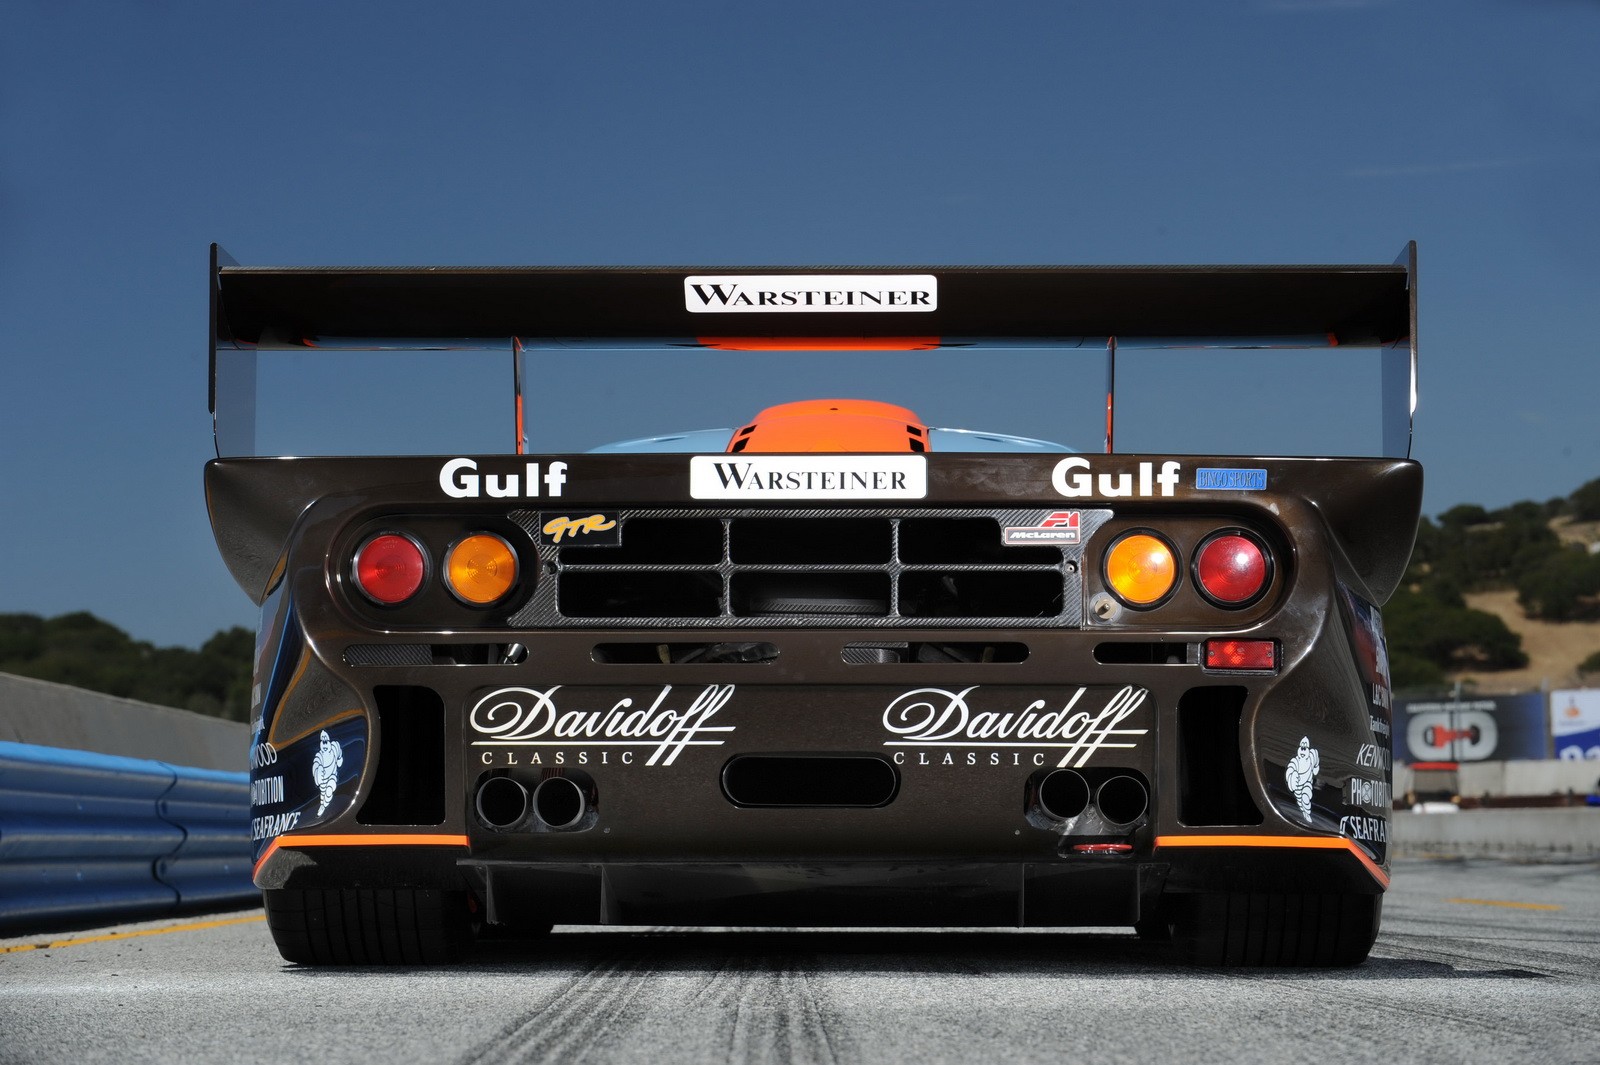 mclaren-f1-gtr-longtail-is-a-fine-racecar-looking-for-a-new-owner-video-photo-gallery_13.jpg